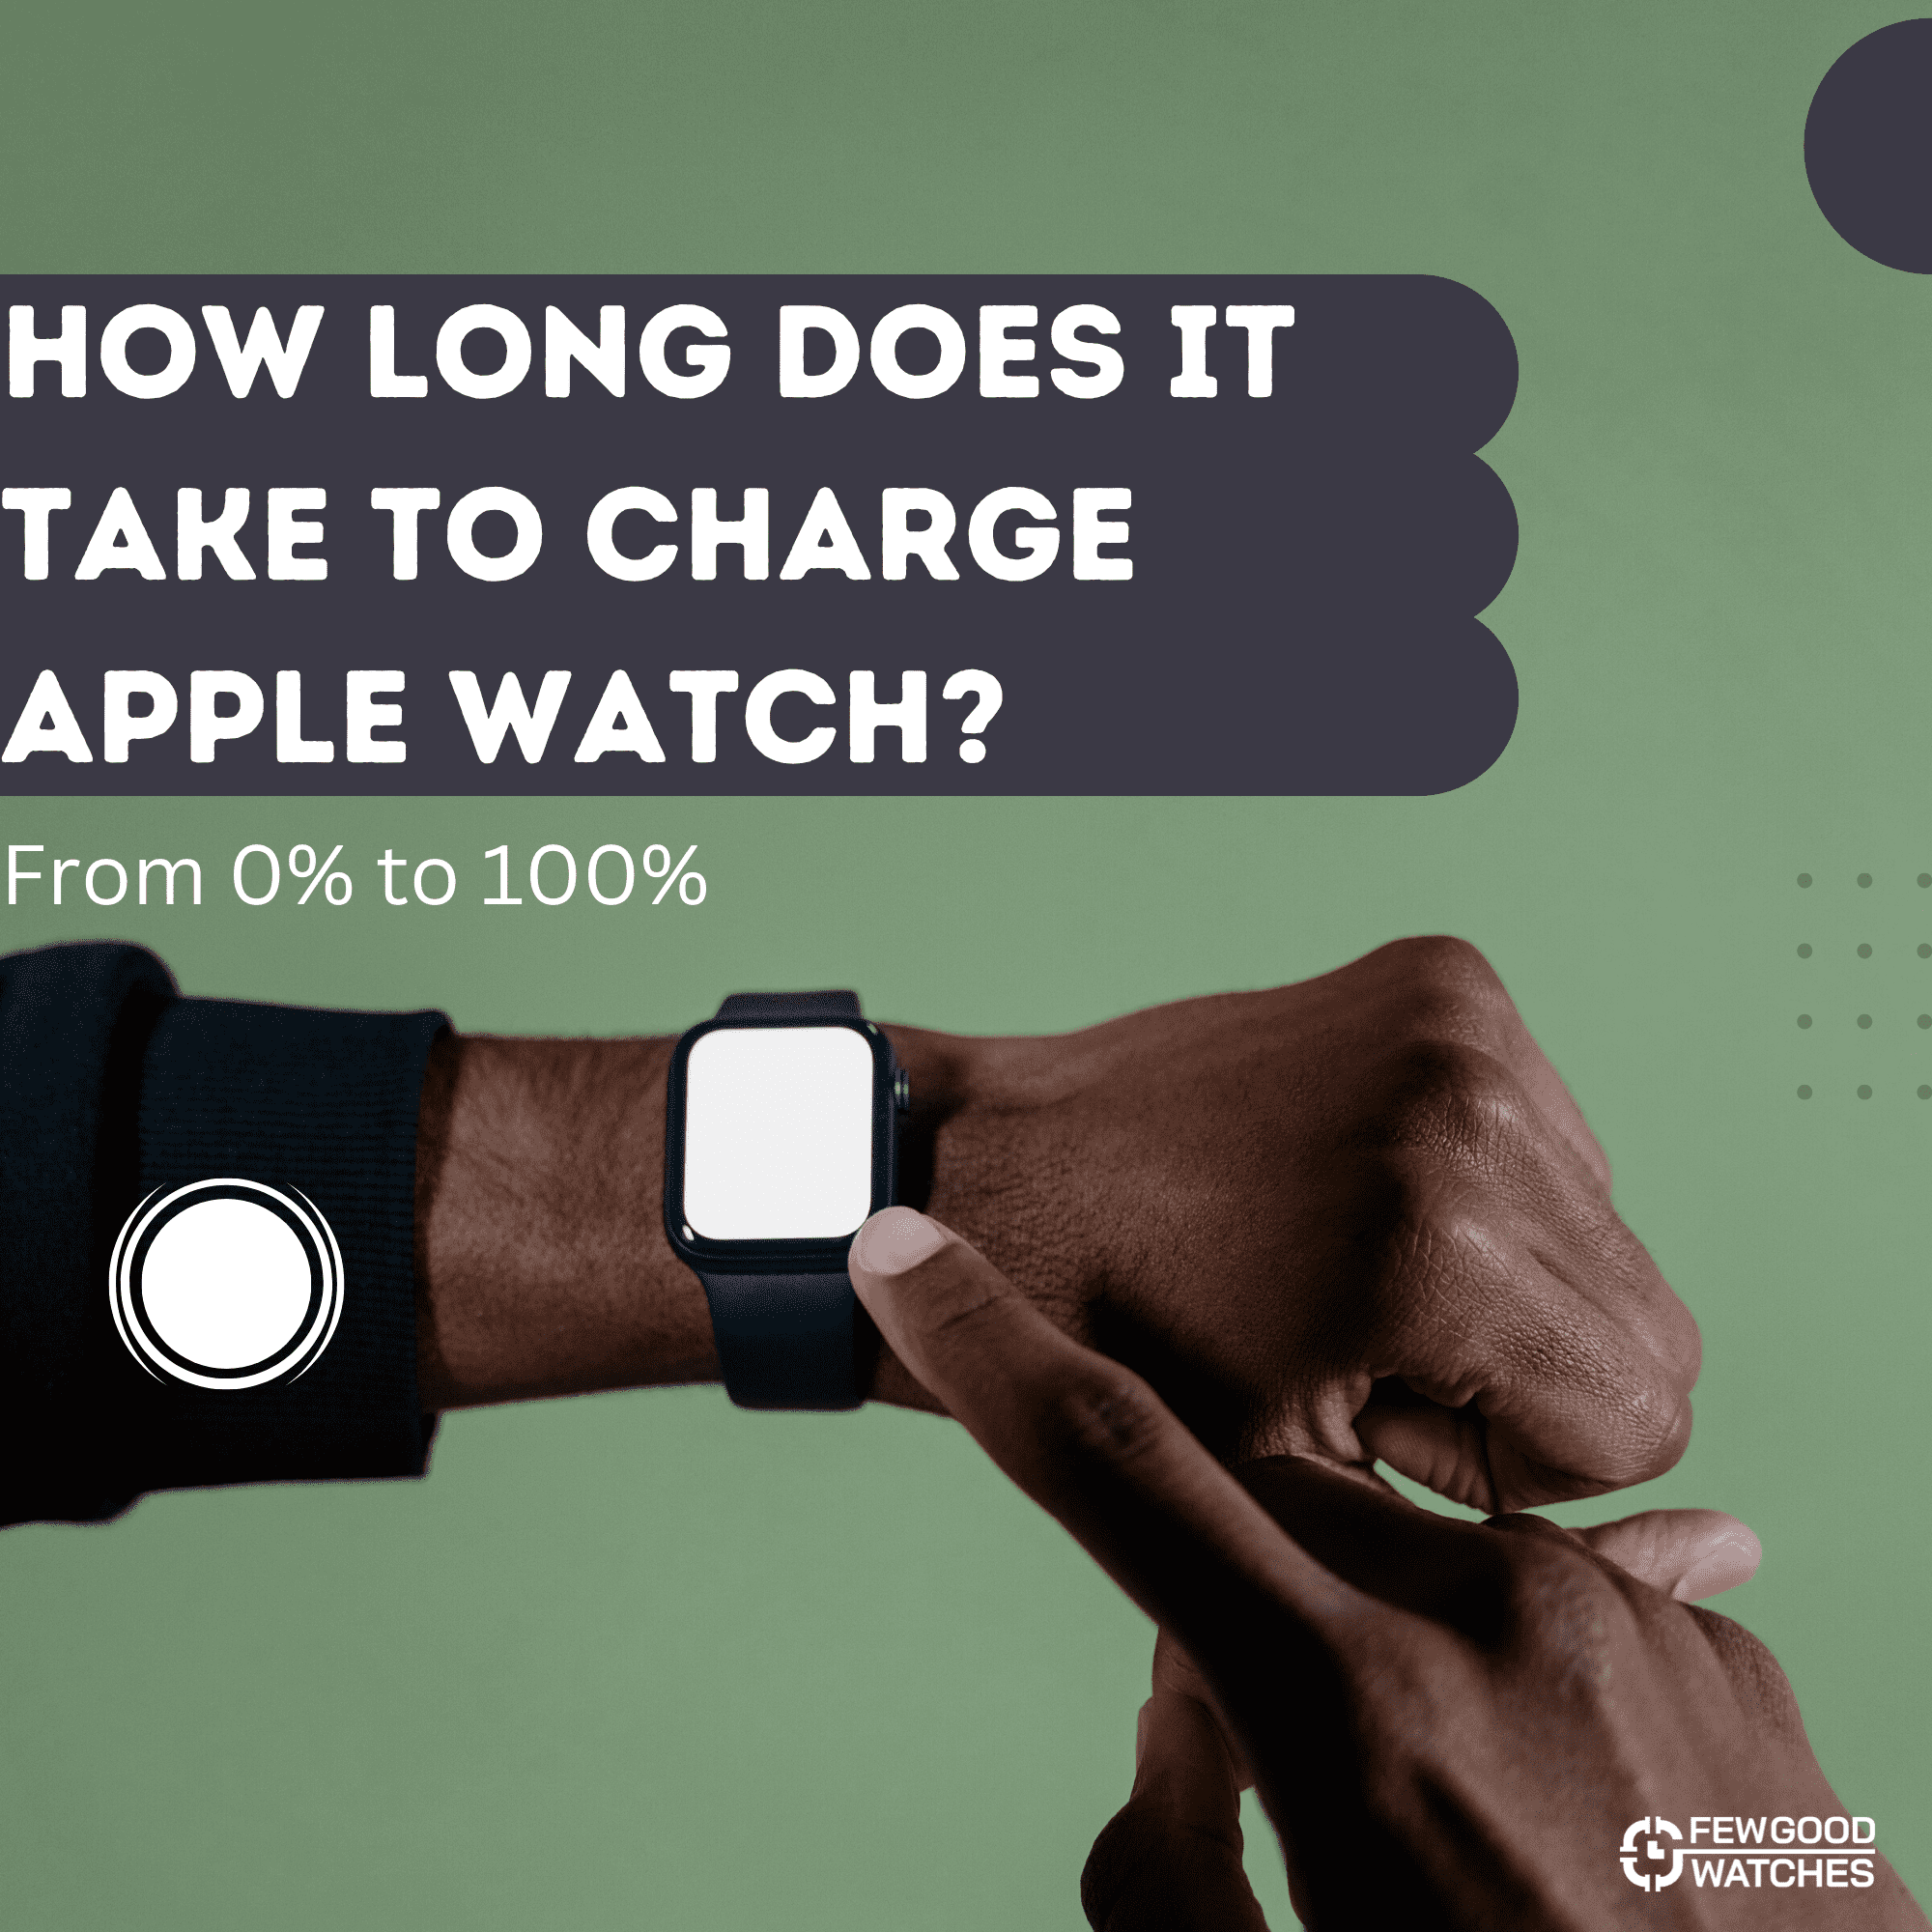 how long does it take to charge apple watch from 0 to 100 percent -answered